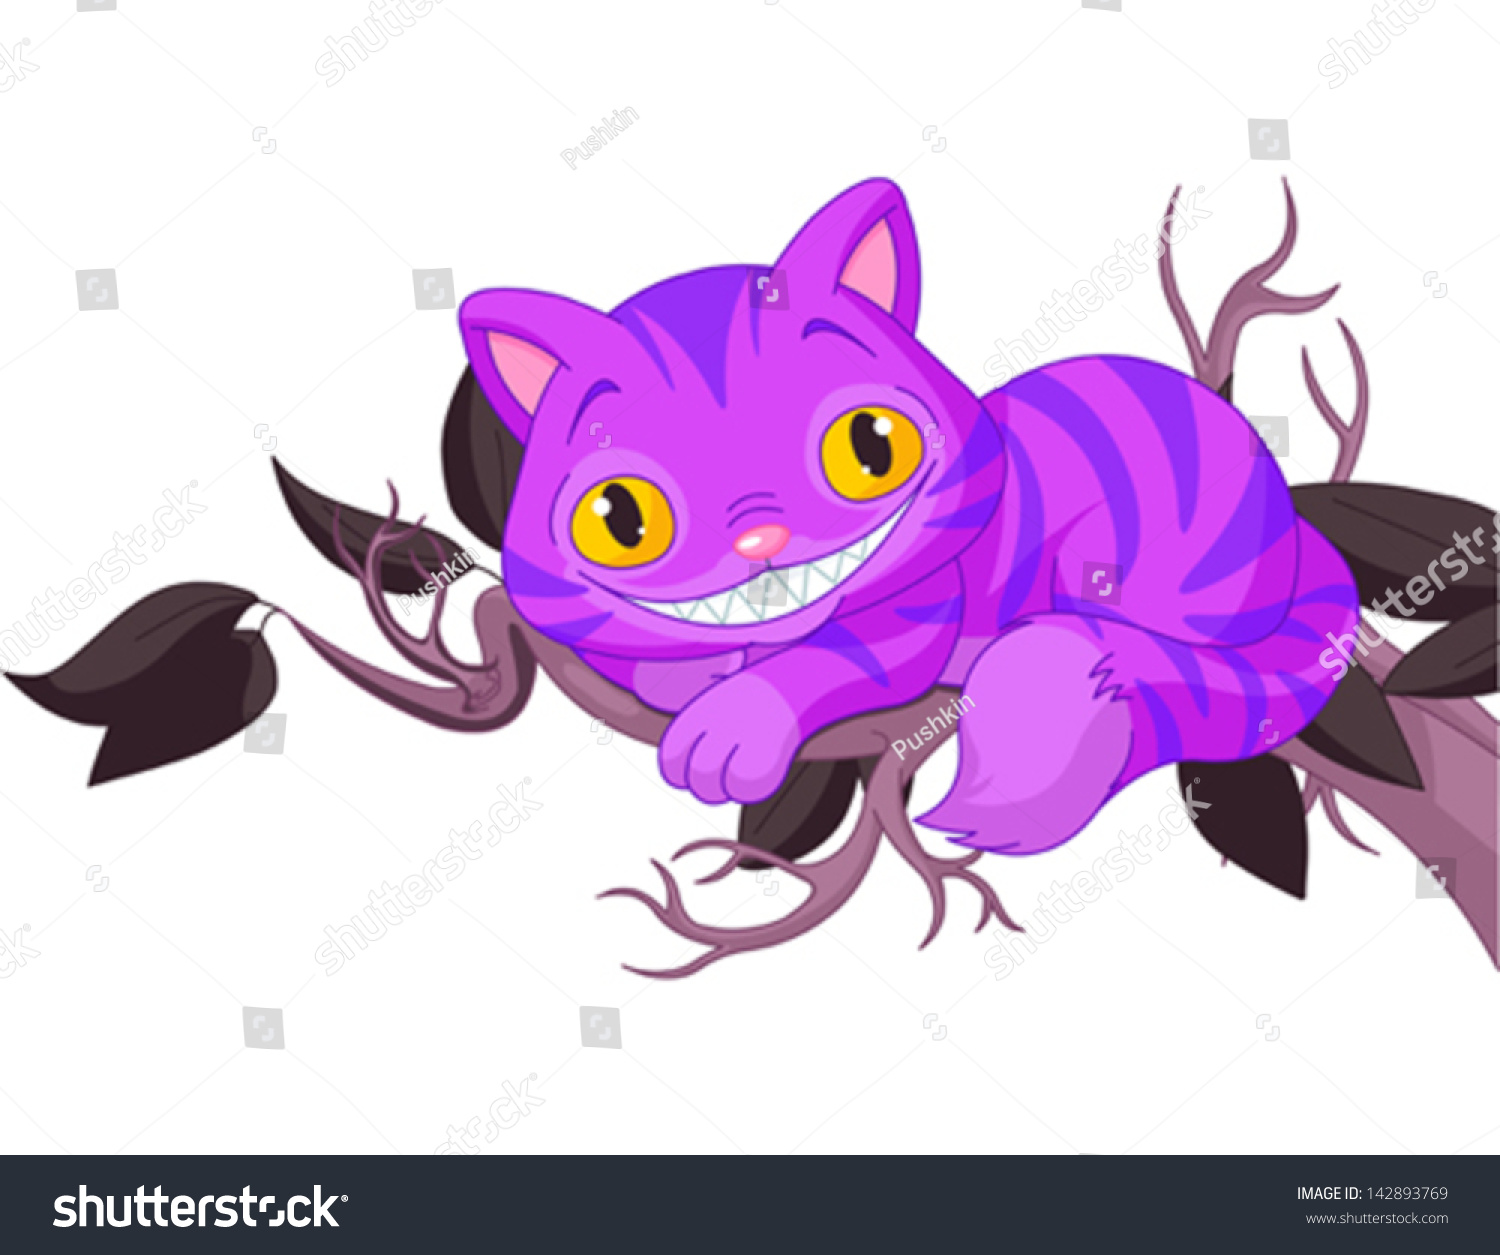 SVG of Magic Cheshire Cat resting on a tree branch svg